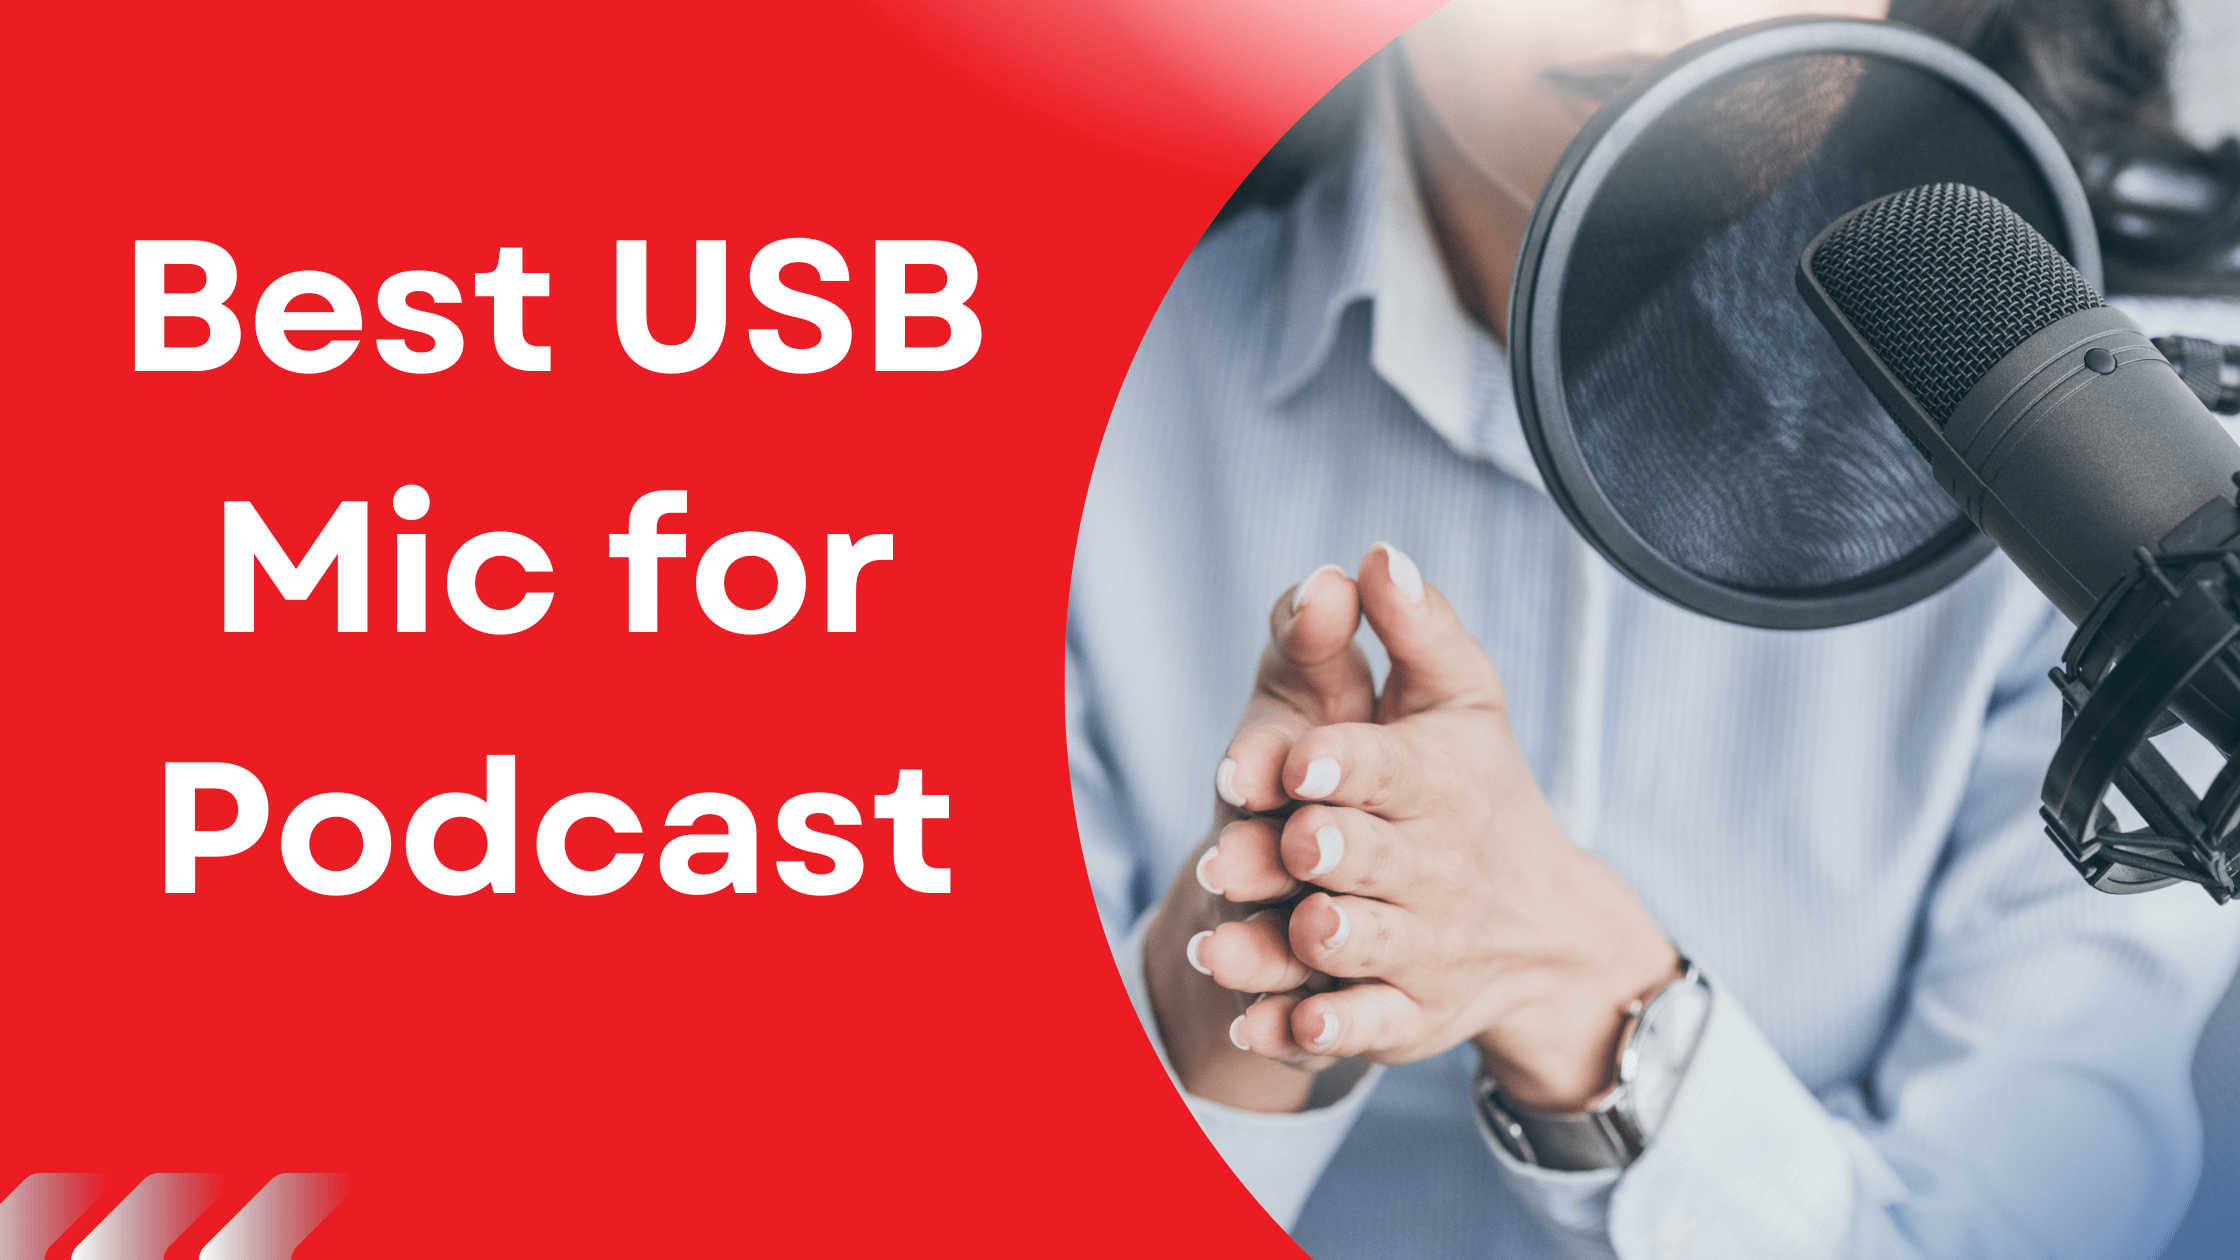 Best USB Mic for Podcast